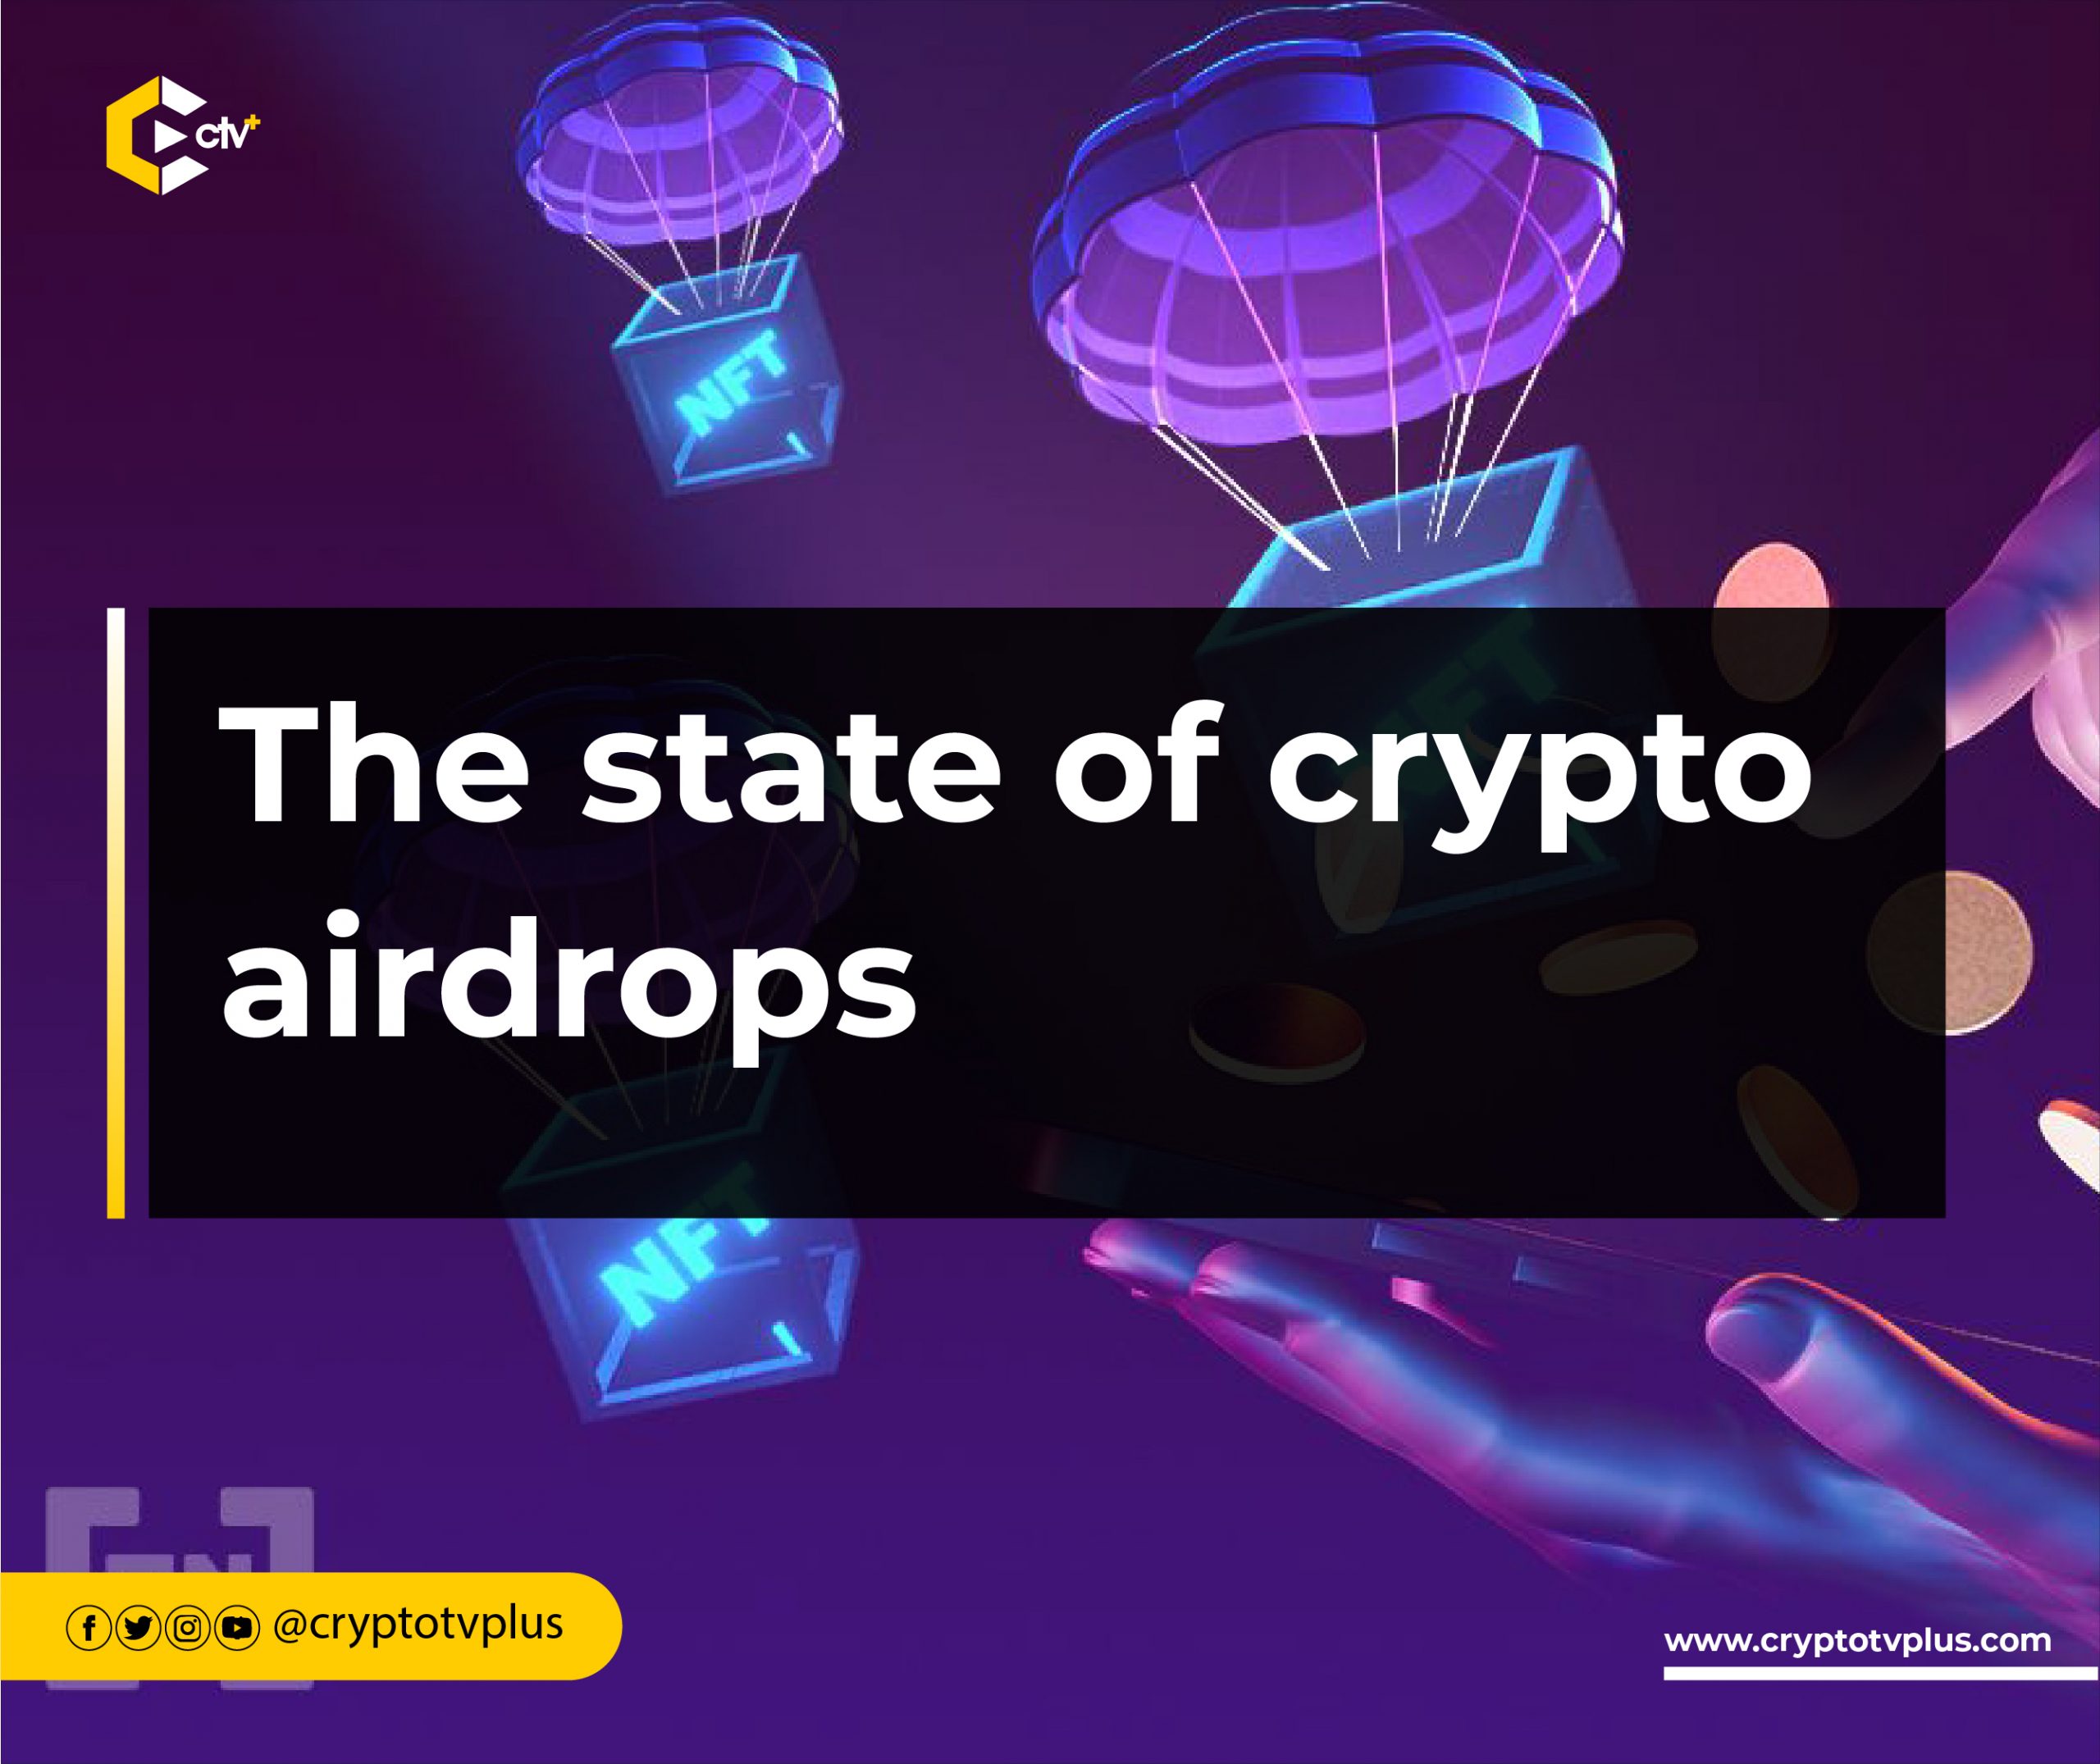 State of crypto airdrop